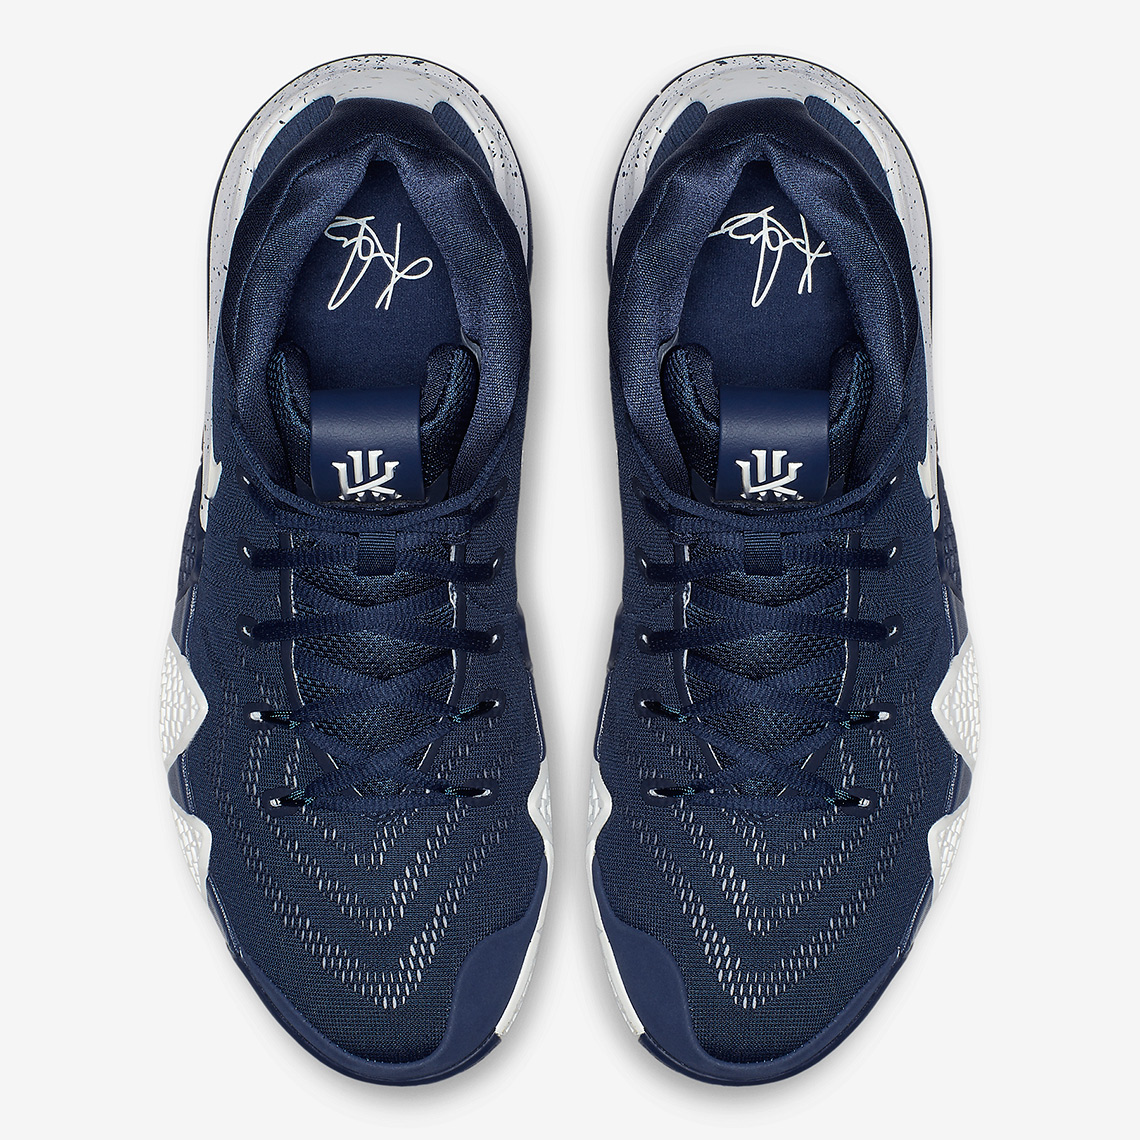 kyrie 4 navy and white